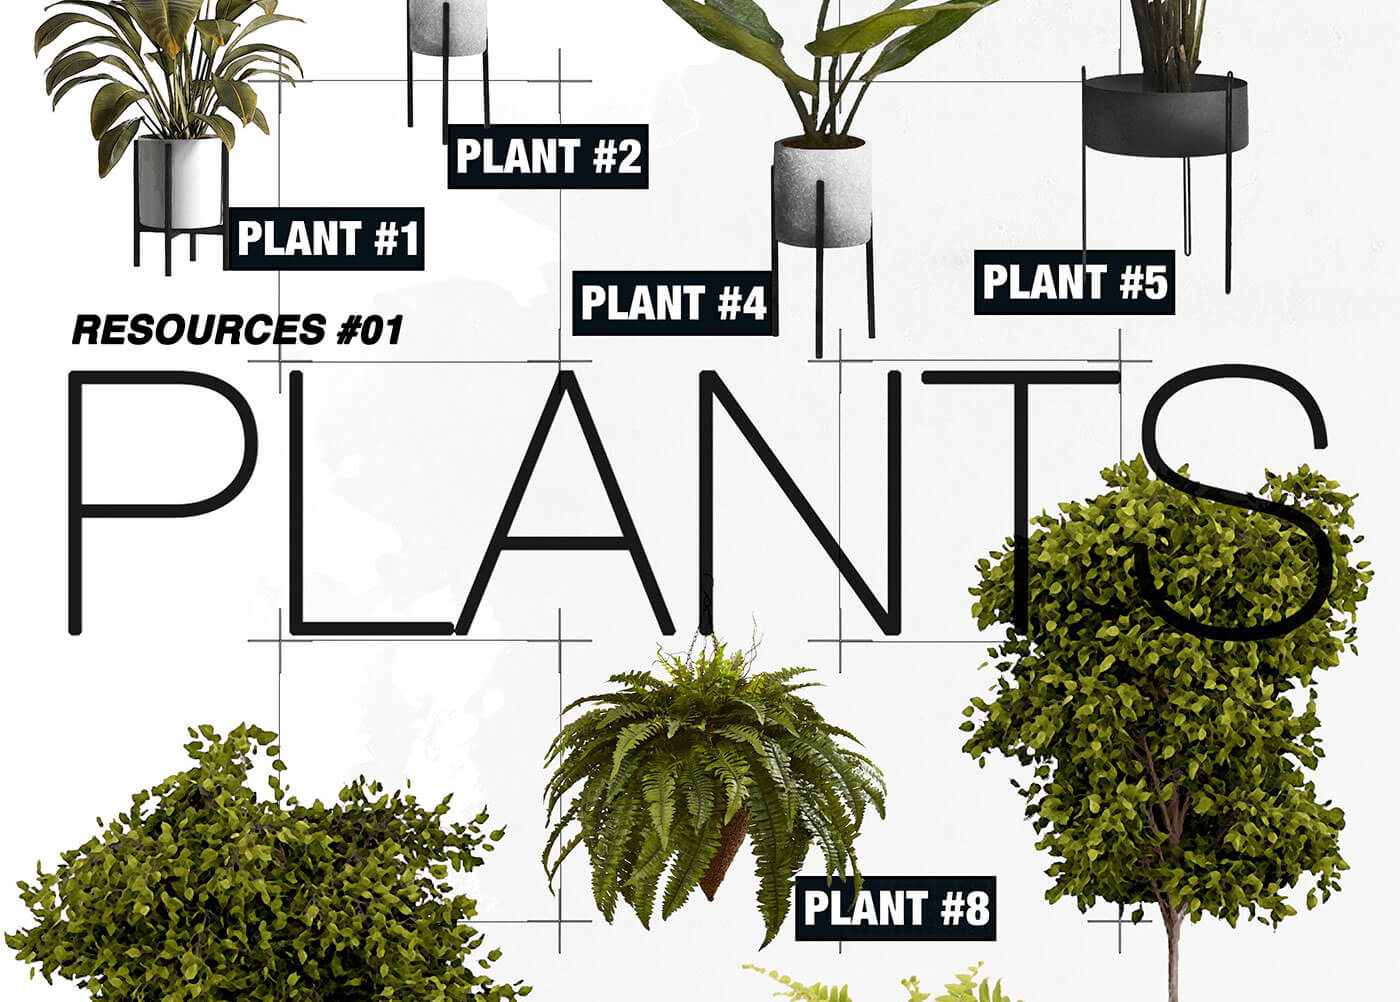 Download Free Indoor Plants PSD Design Resources for Architects